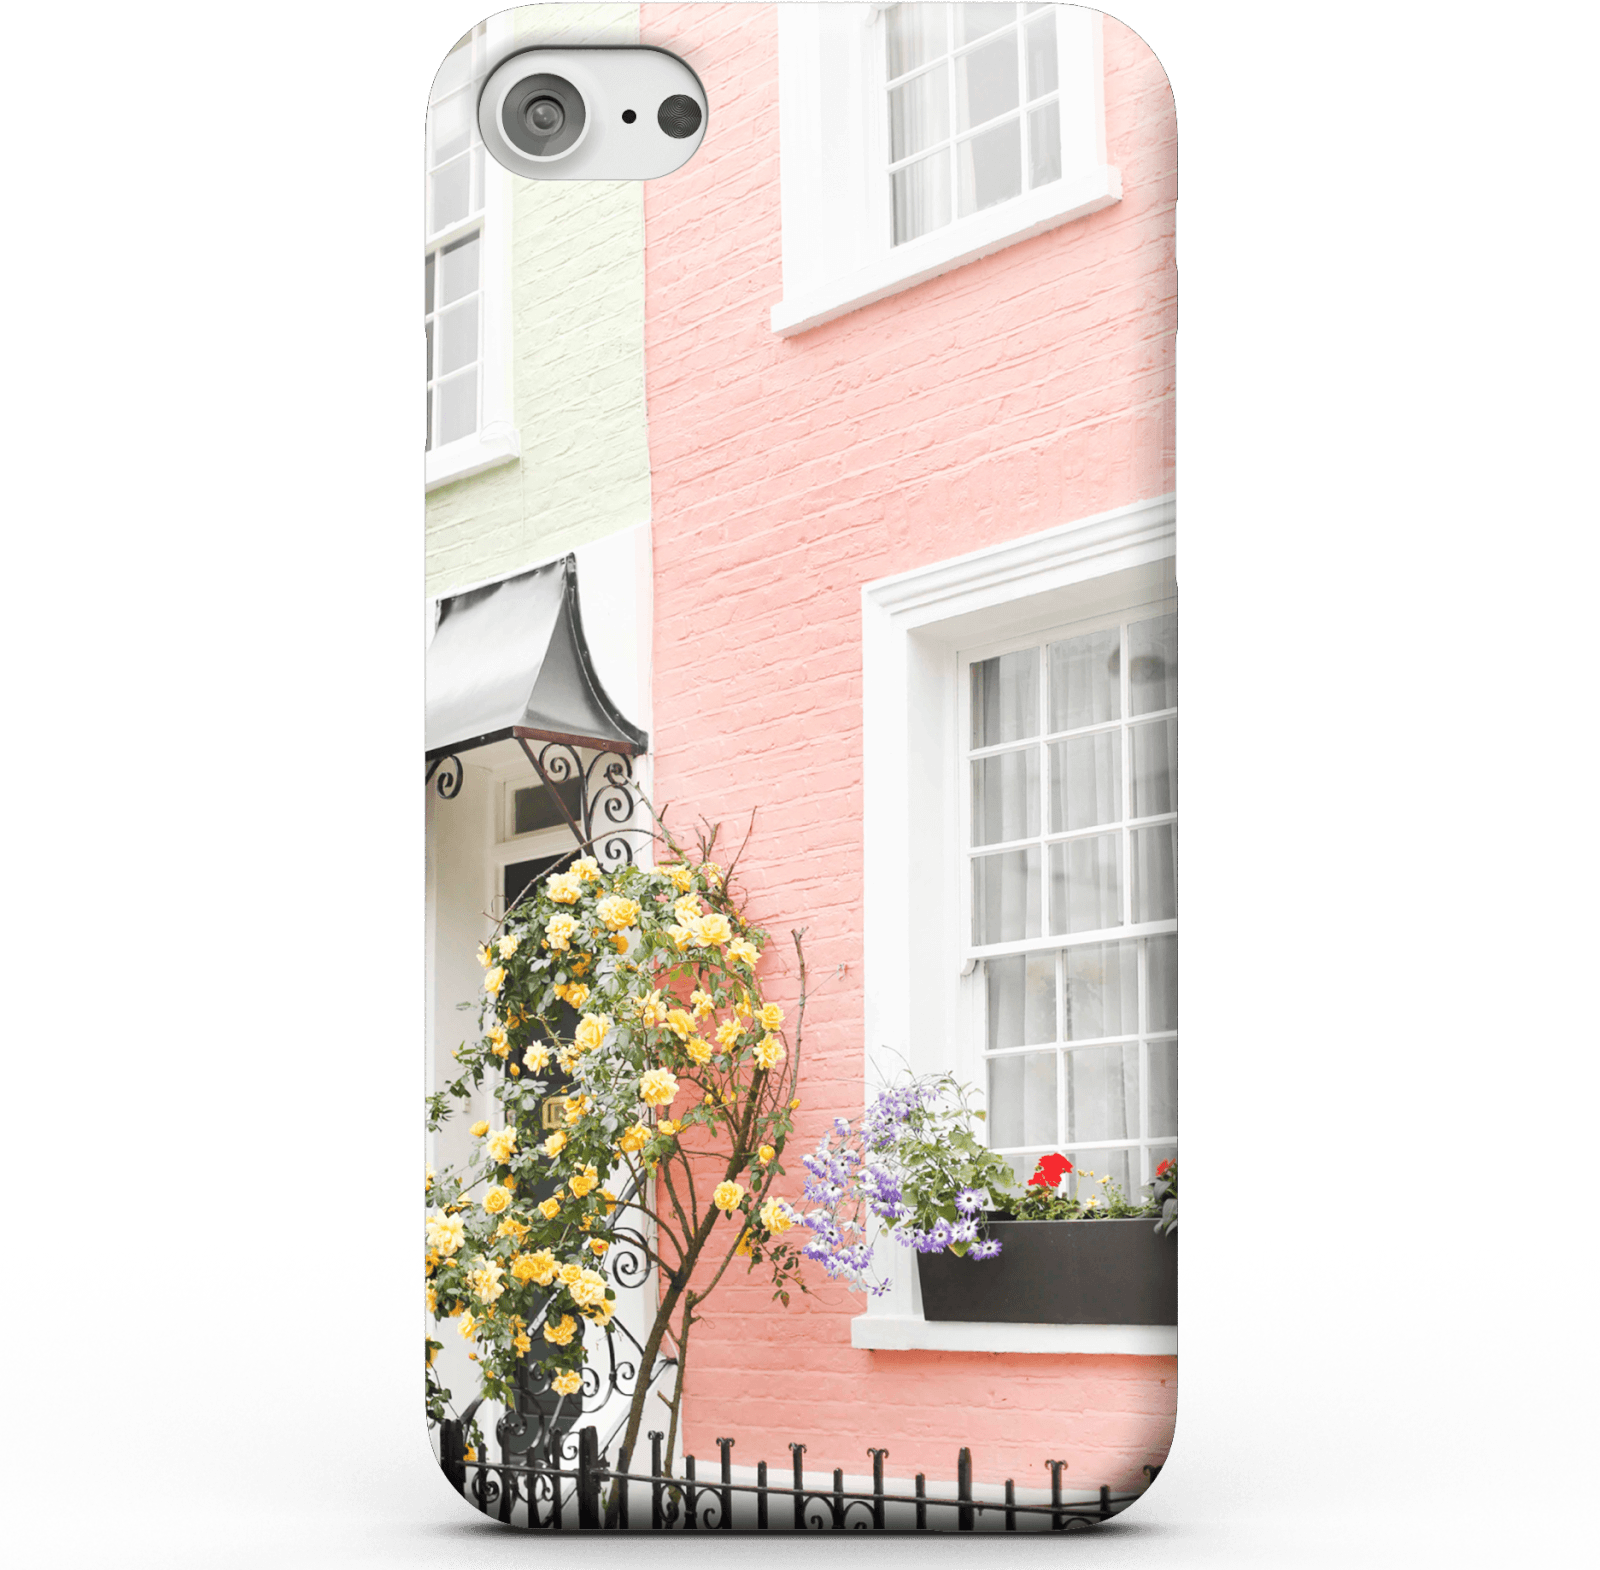 Sweet Buildings Phone Case for iPhone and Android - iPhone 5/5s - Snap Case - Matte